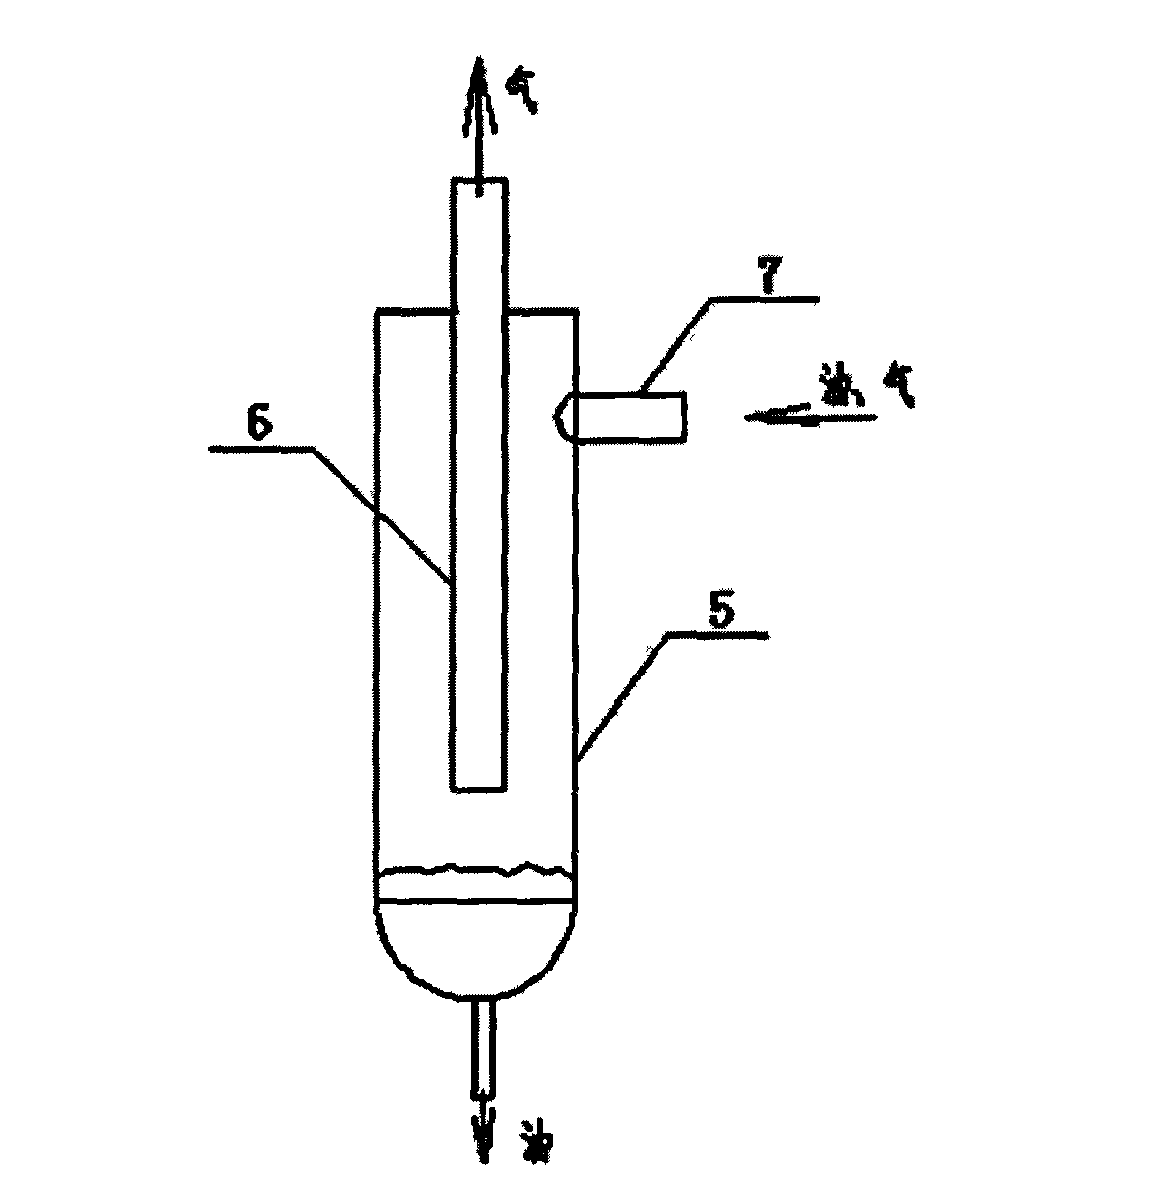 Oil-gas separator having fully-closed helical channel and tail portion micro-channels